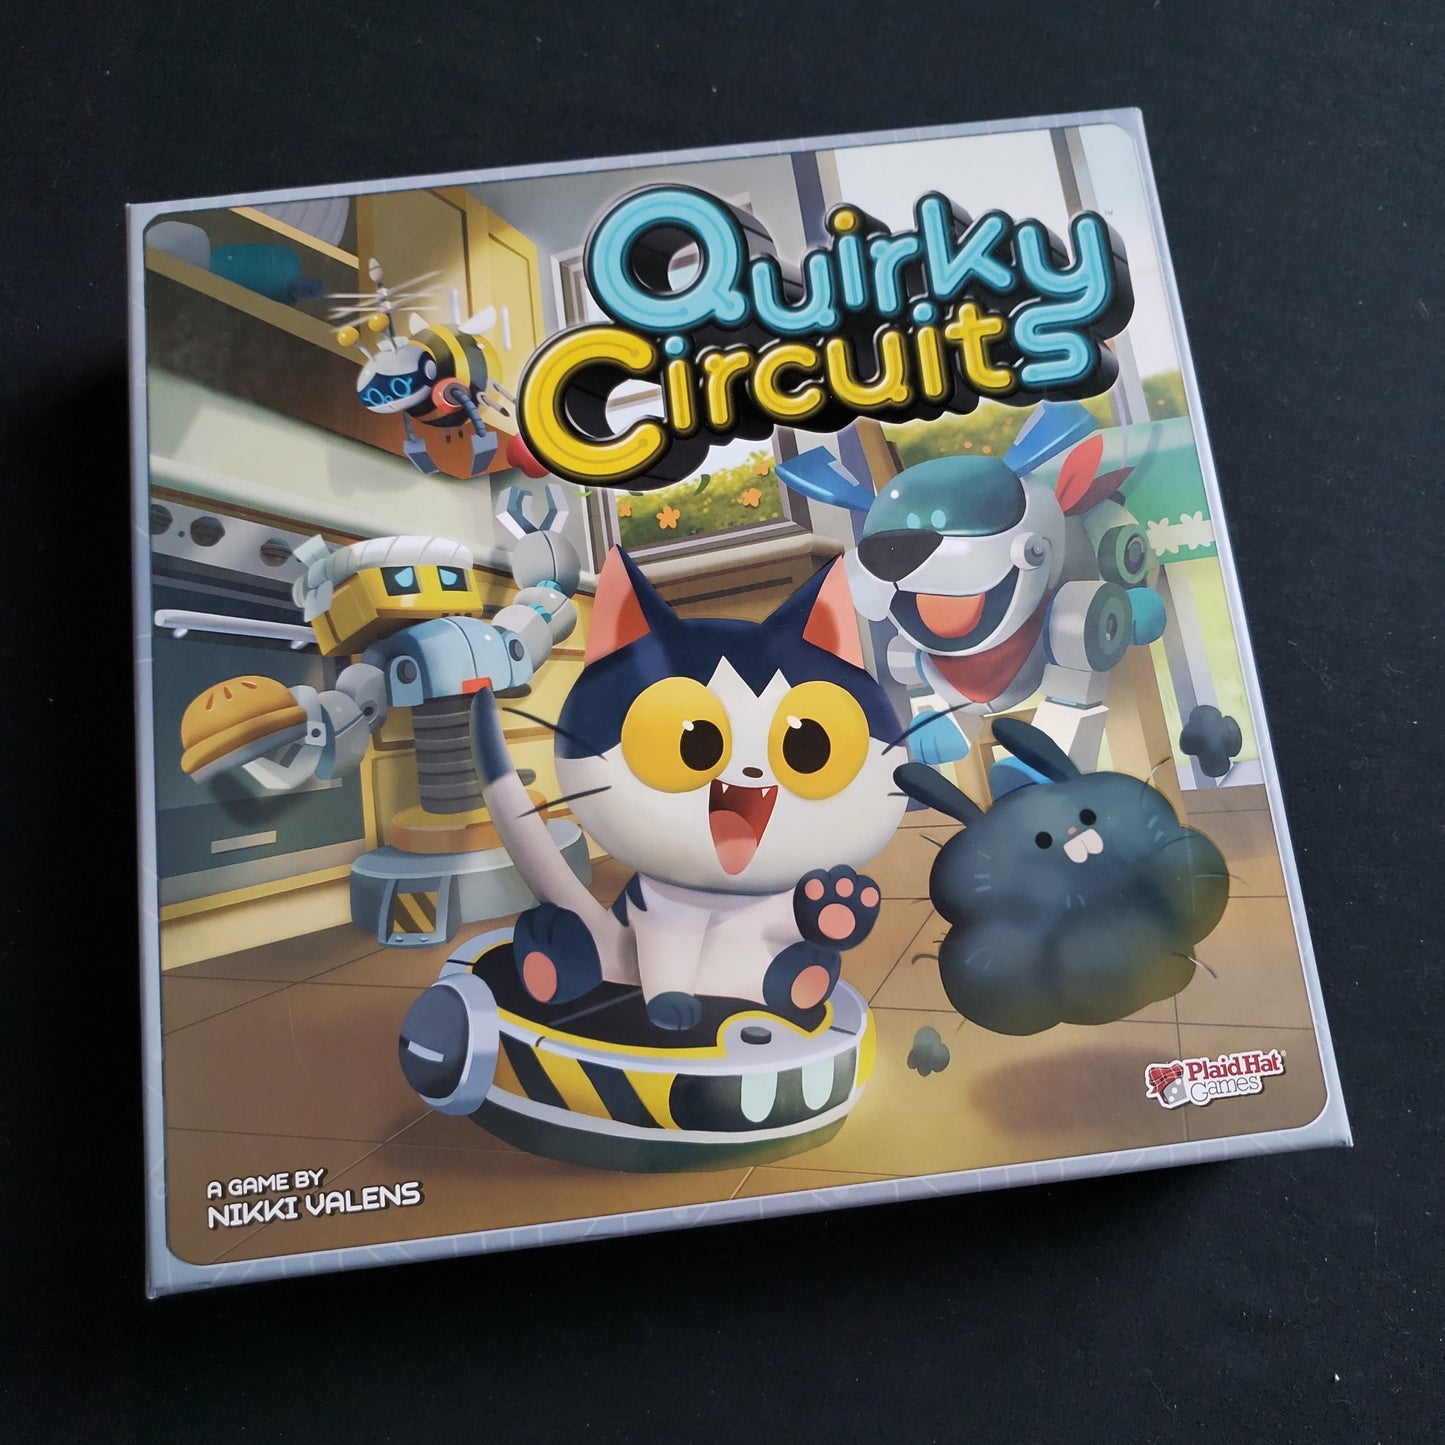 Image shows the front cover of the box of the Quirky Circuits board game